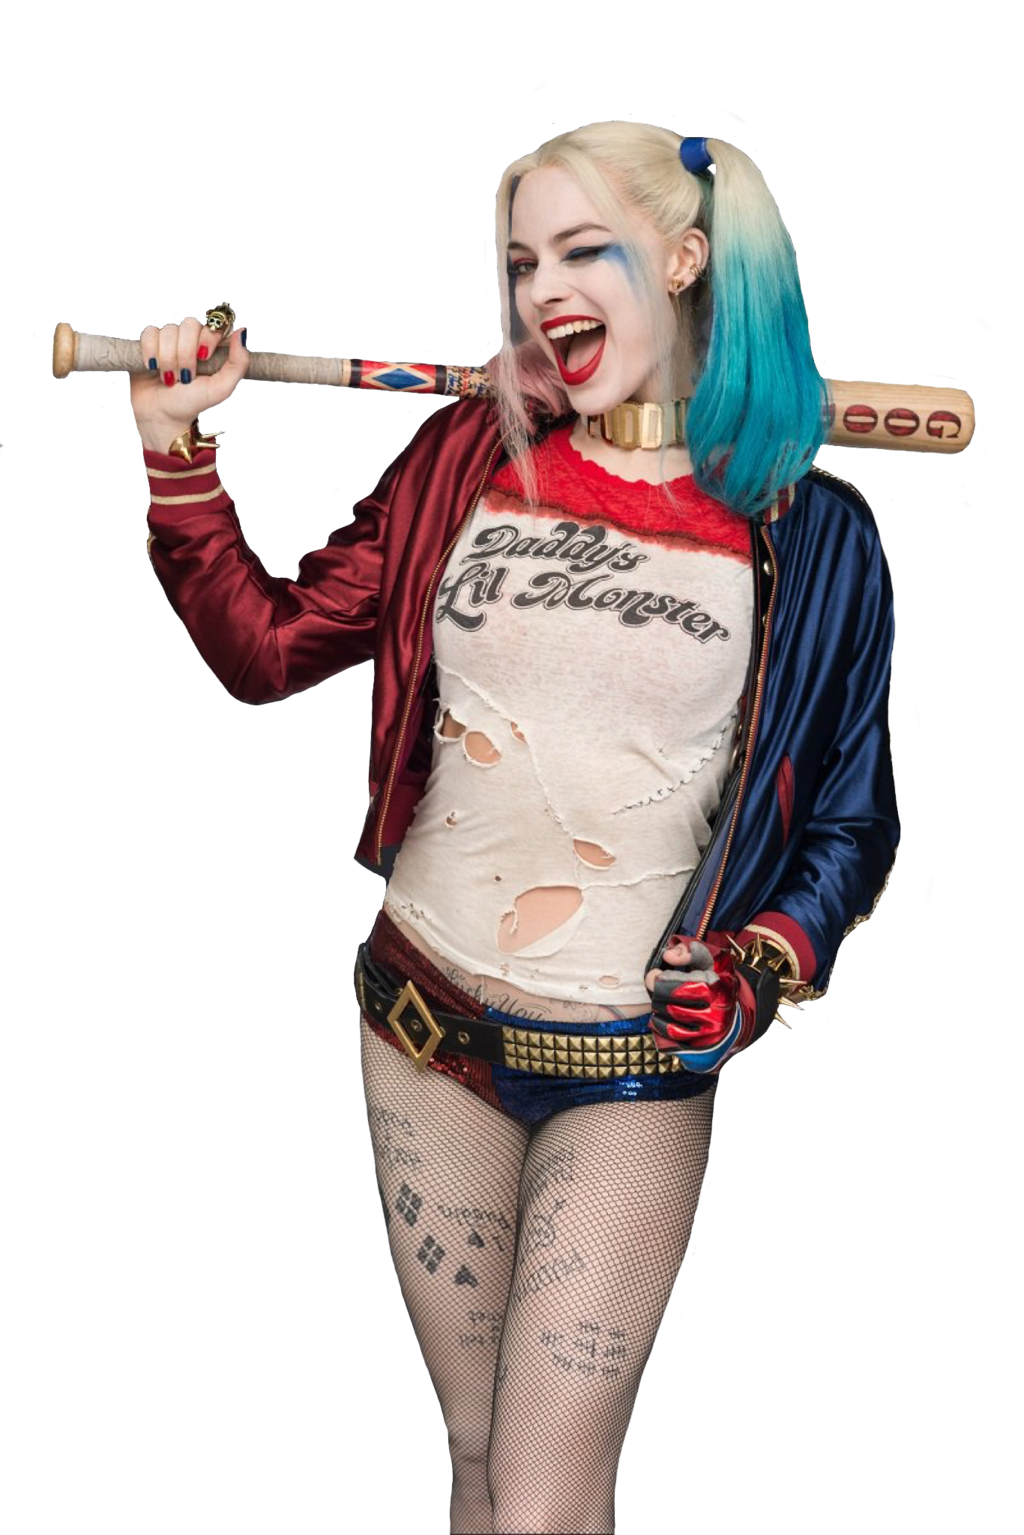 Harley Quinn PNG #21 by Anna-